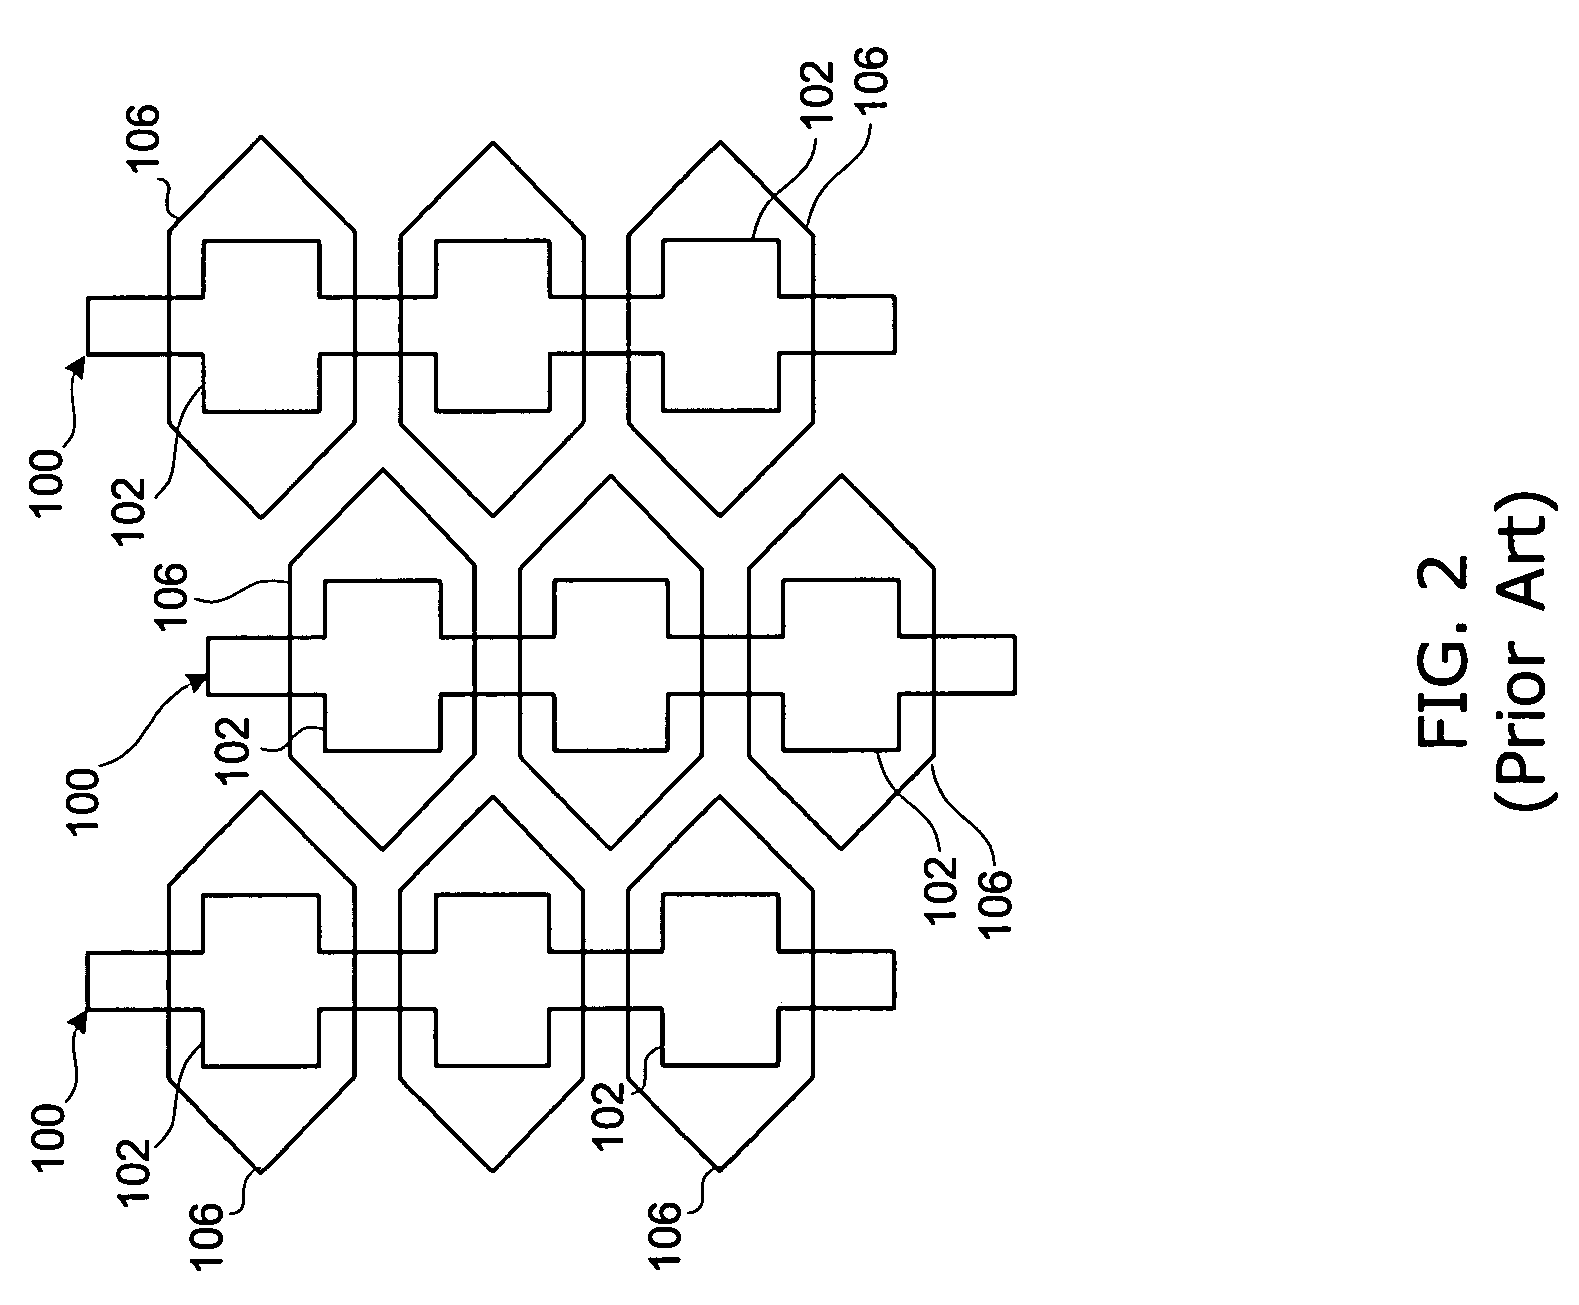 Electrode and method of manufacture